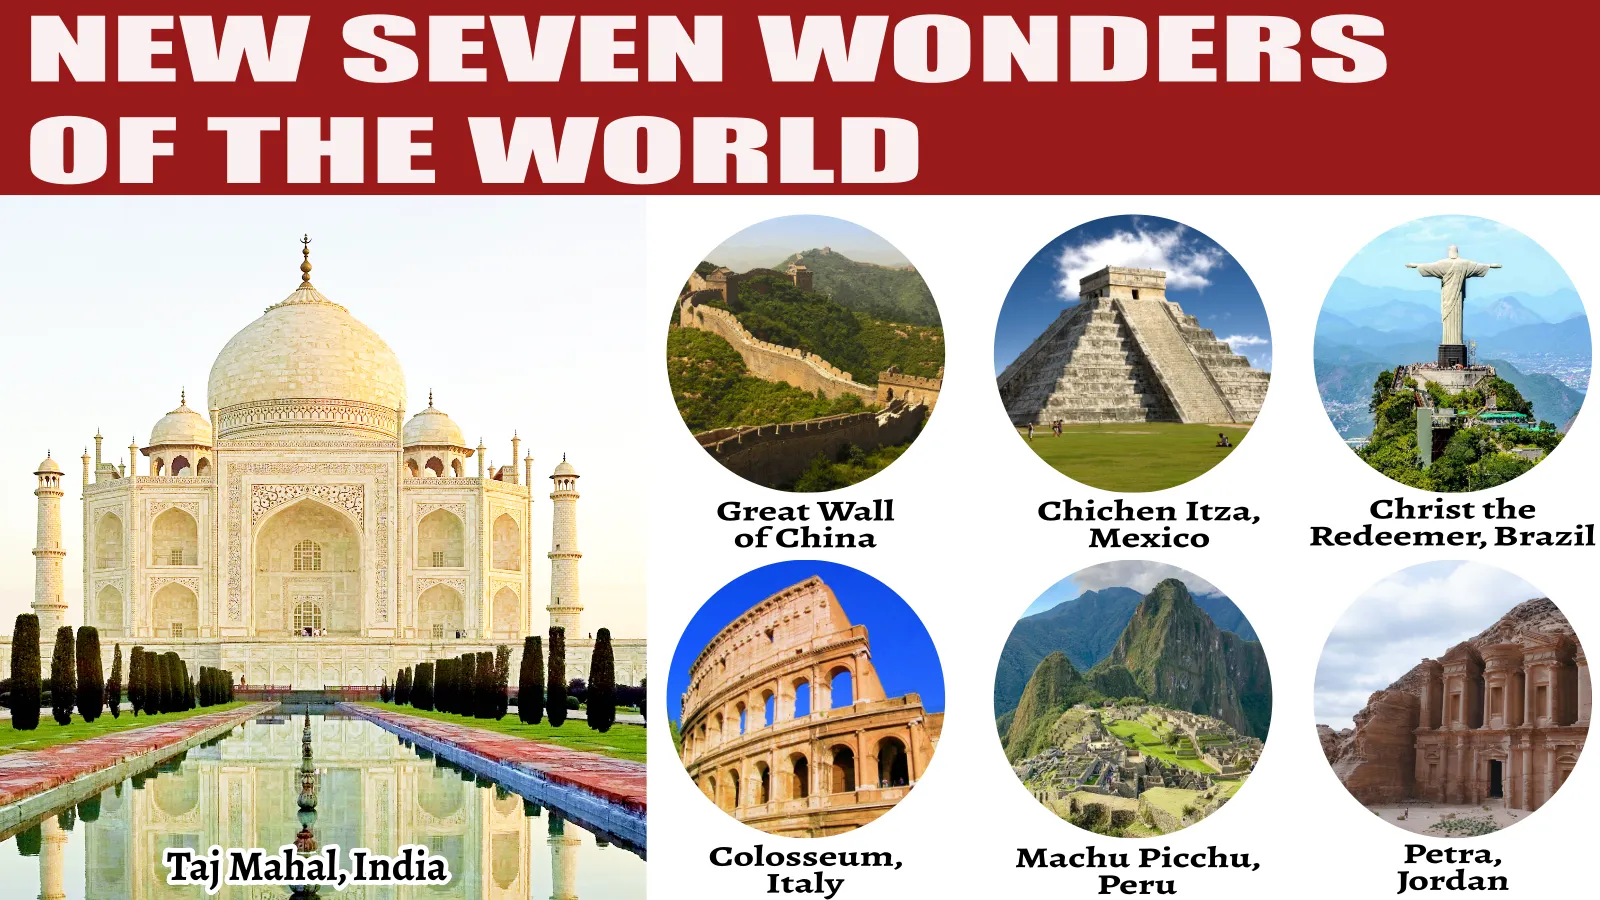 Exploring the Seven Wonders of the World